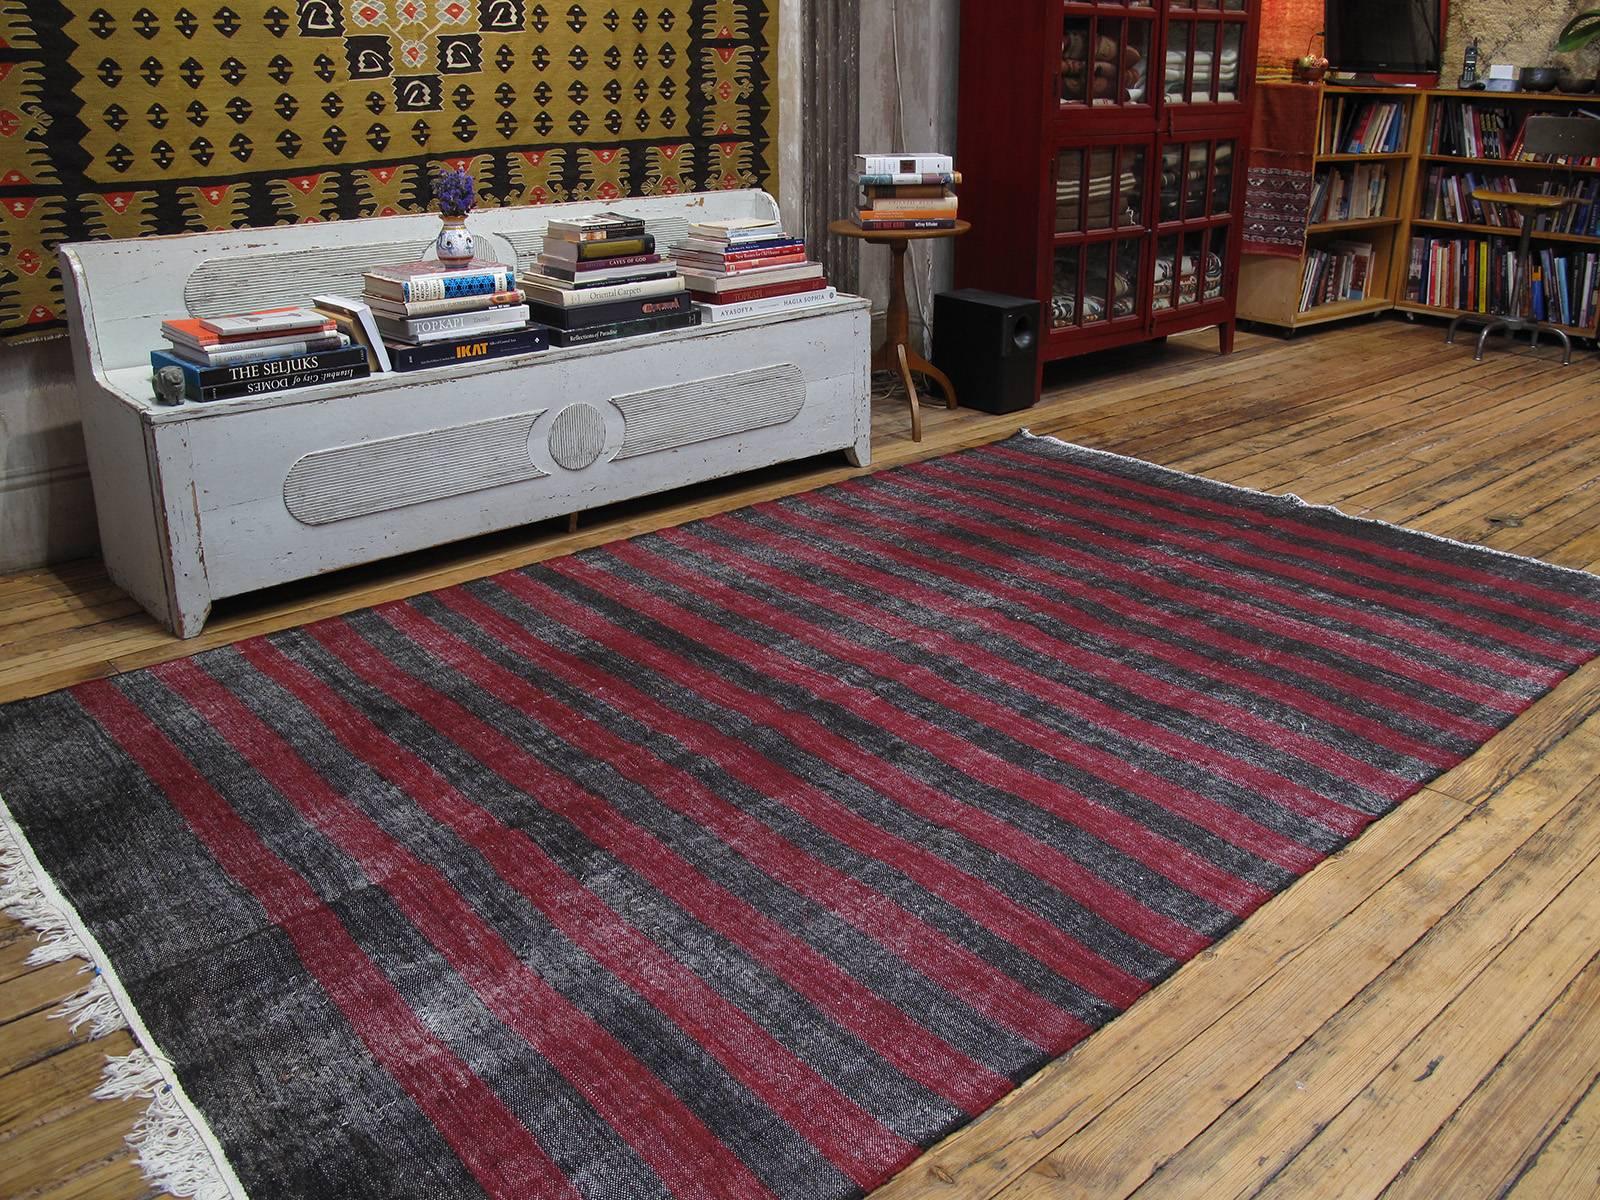 Banded goat hair Kilim rug. A primitive, dramatic tribal flat-weave rug woven entirely with goat hair in natural dark brown (almost black) and red bands. Woven as a utilitarian floor cover or rug, it has a rough texture. Rug has great